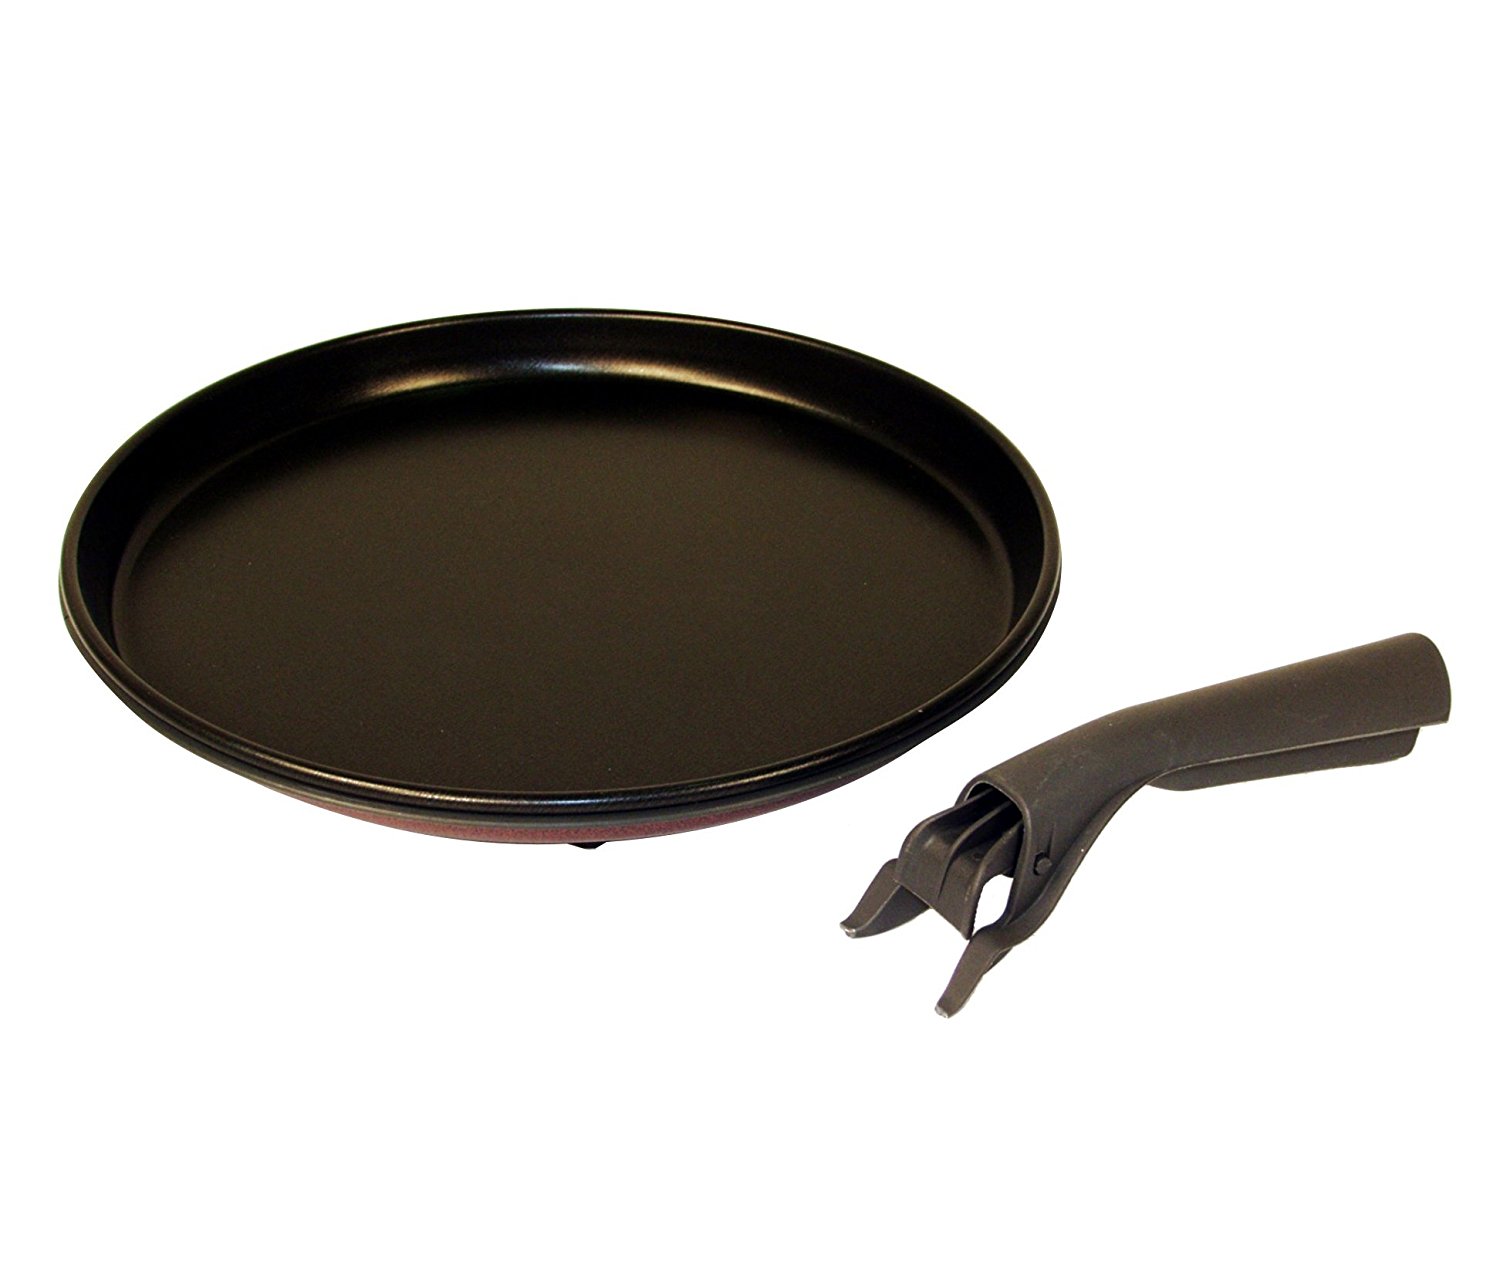 Microwave pizza pan for the best reheated leftovers